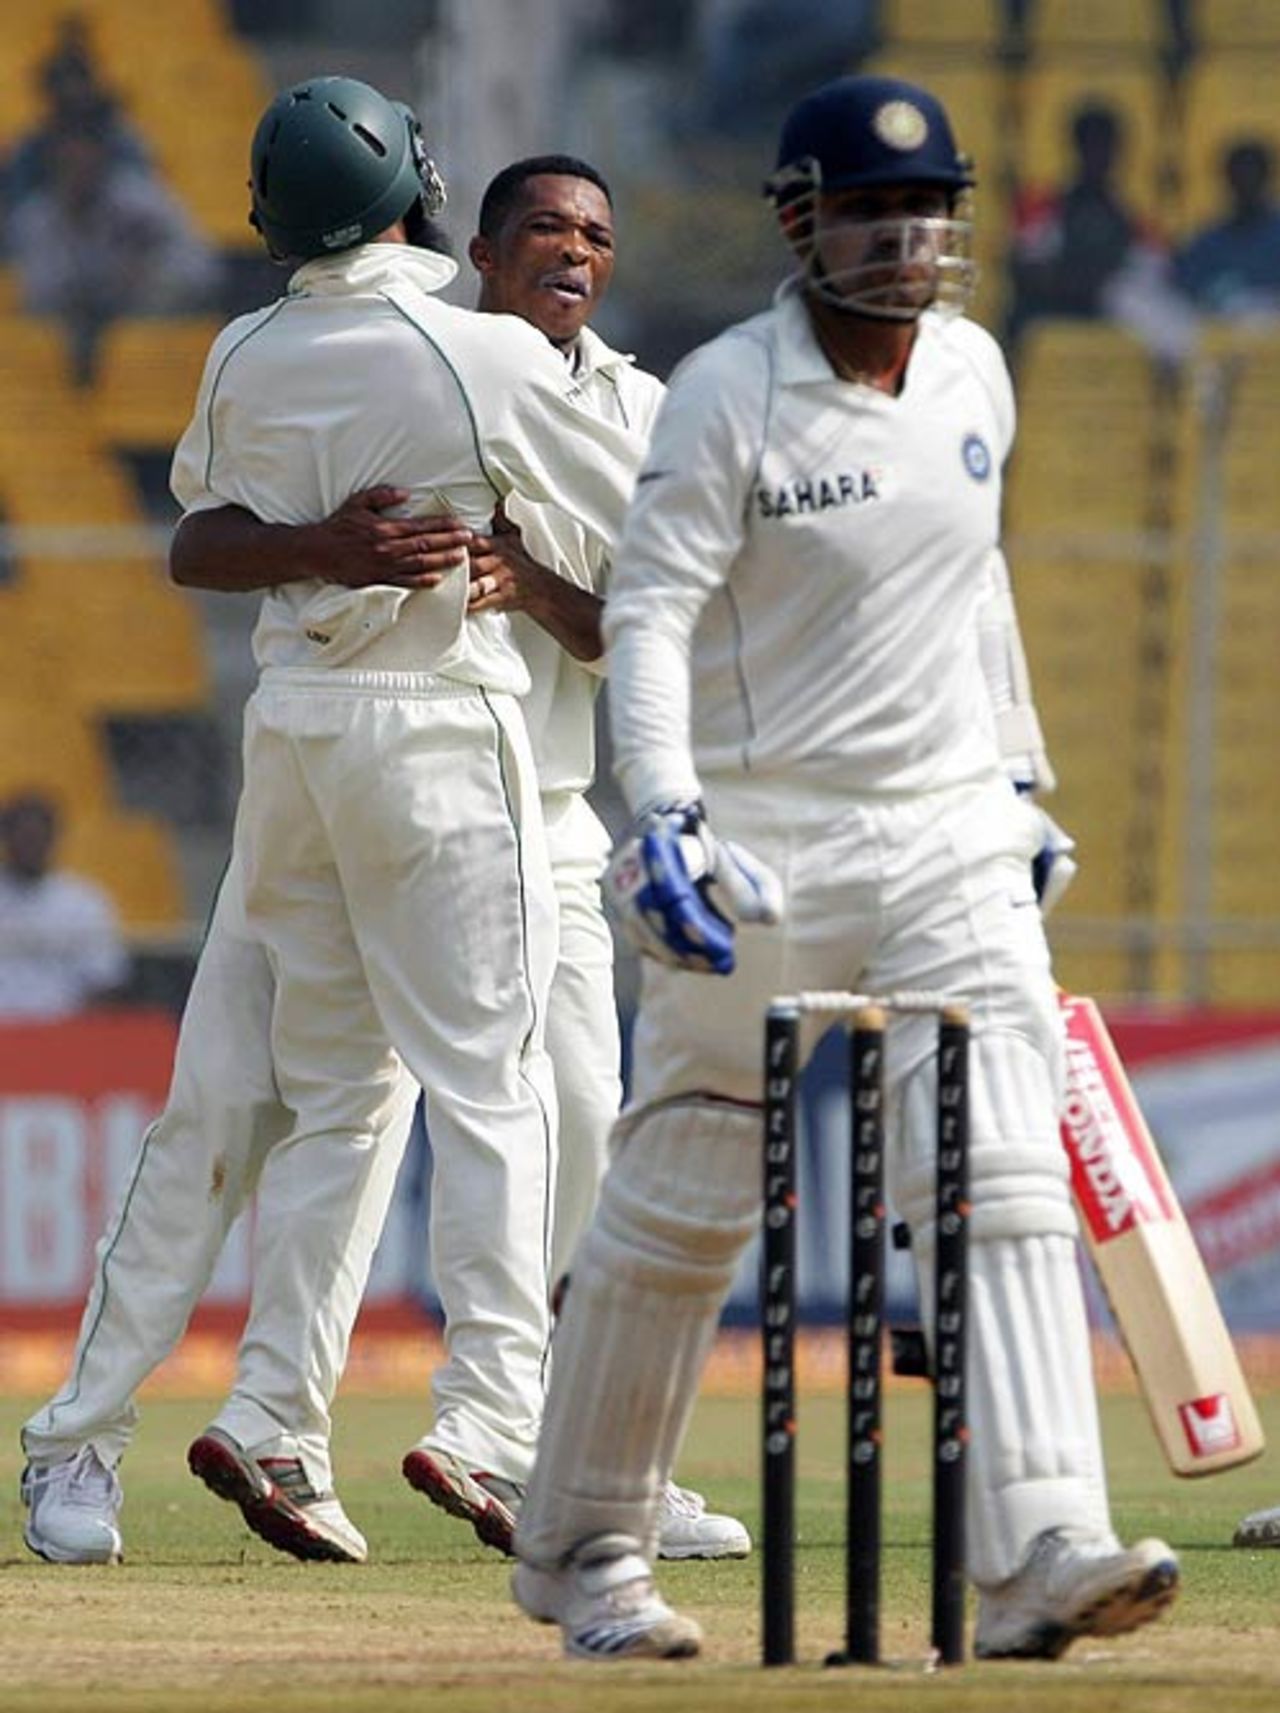 Makhaya Ntini is thrilled after nailing Virender Sehwag lbw, India v South Africa, 2nd Test, Ahmedabad, 3rd day, April 5, 2008